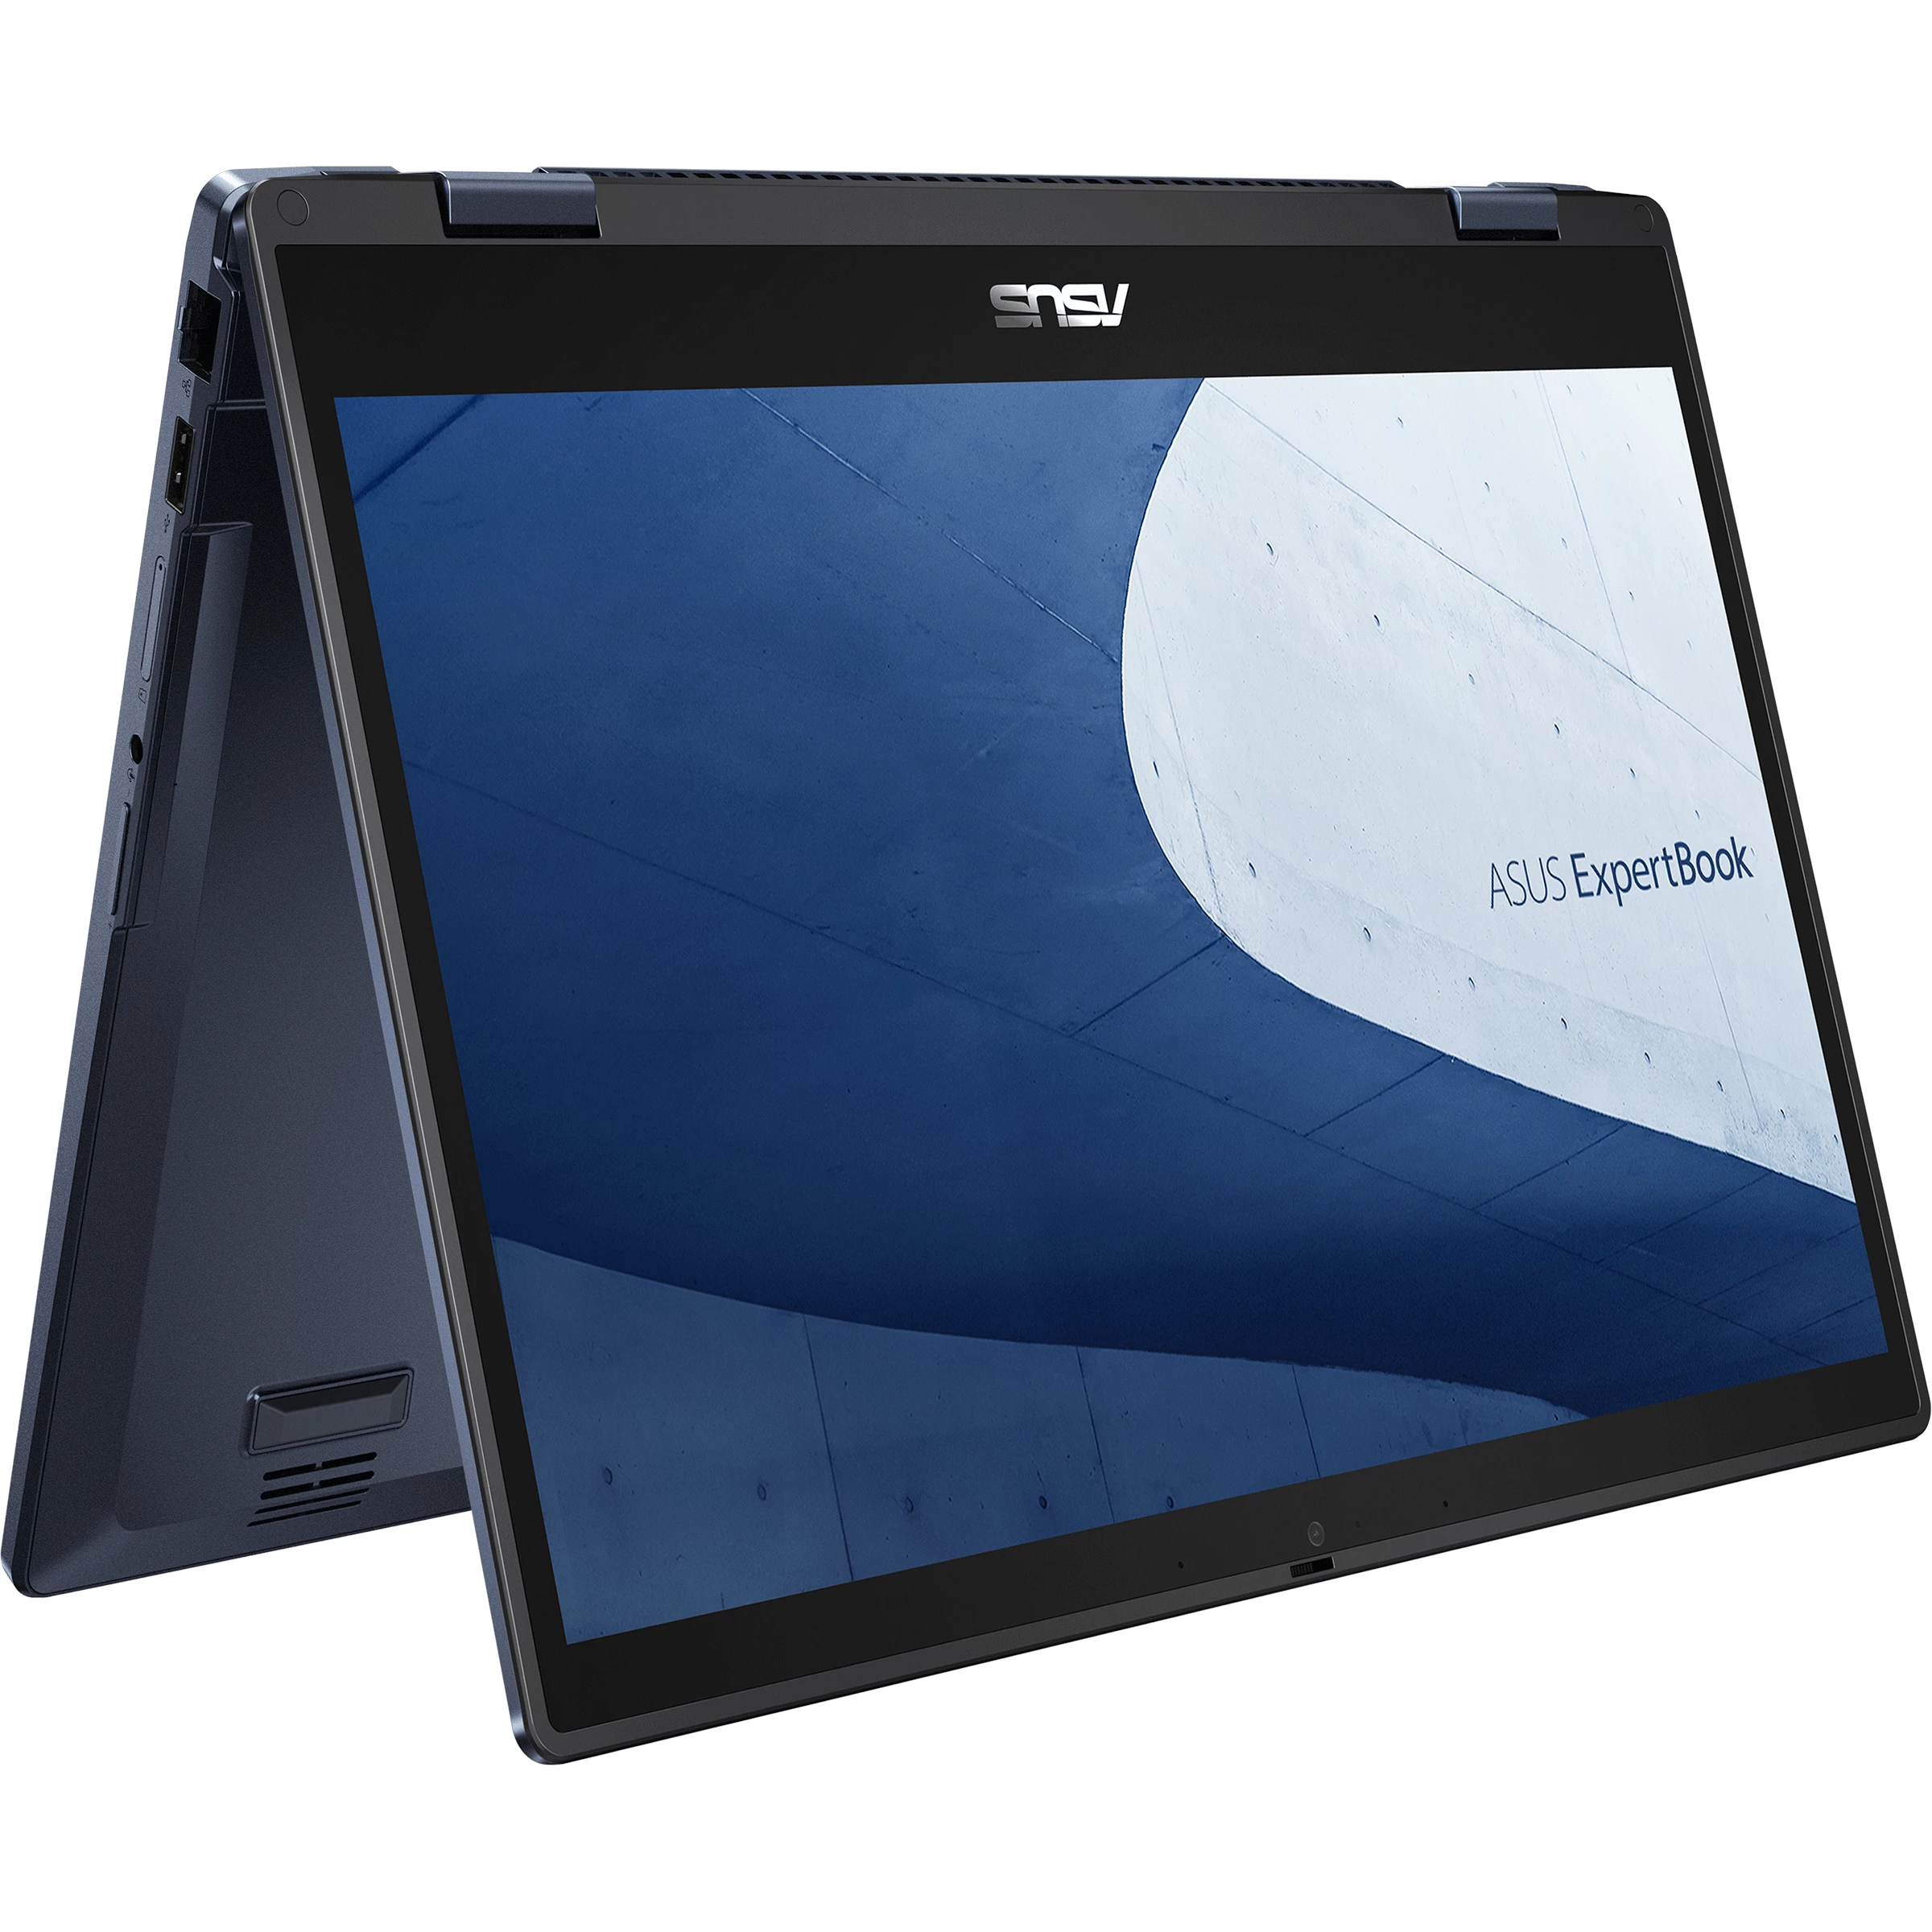 Asus ExpertBook B3 Flip Core-i5 8Gb 512Gb SSD 14" Business Touch Laptop #B3402FBA-EC0016X